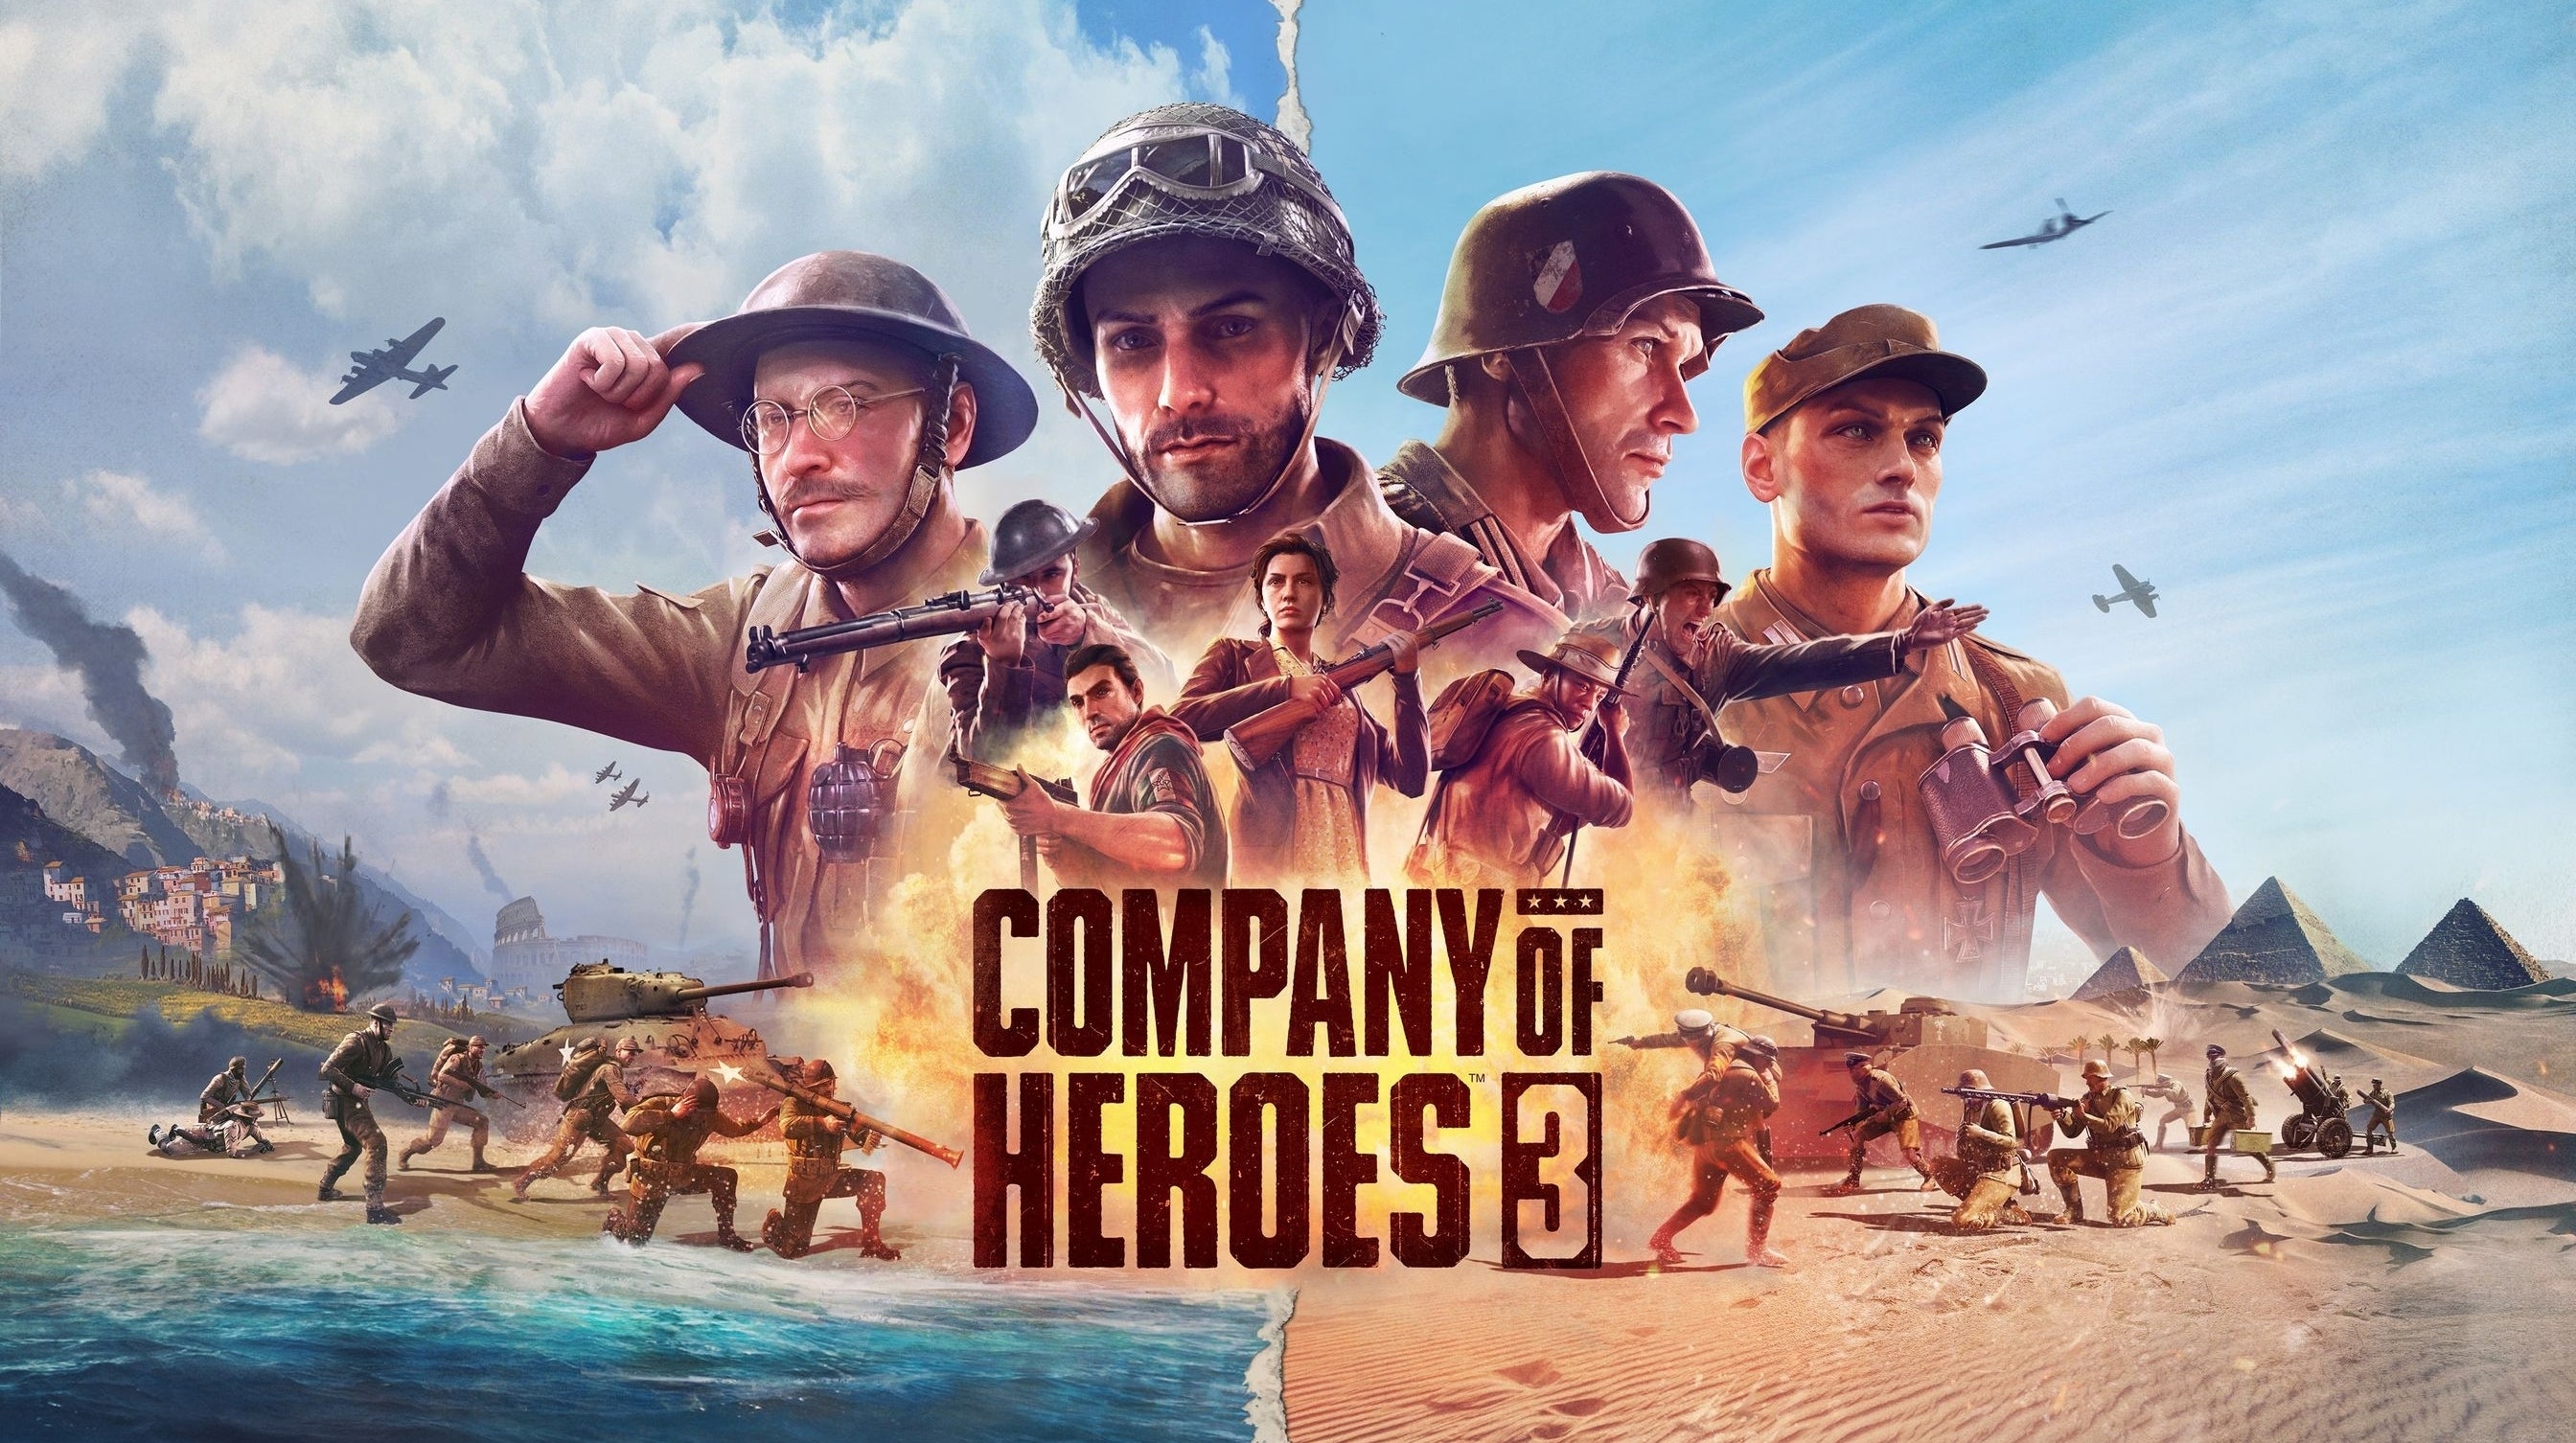 Image for Company of Heroes 3 is coming - and it feels like the original, but bigger